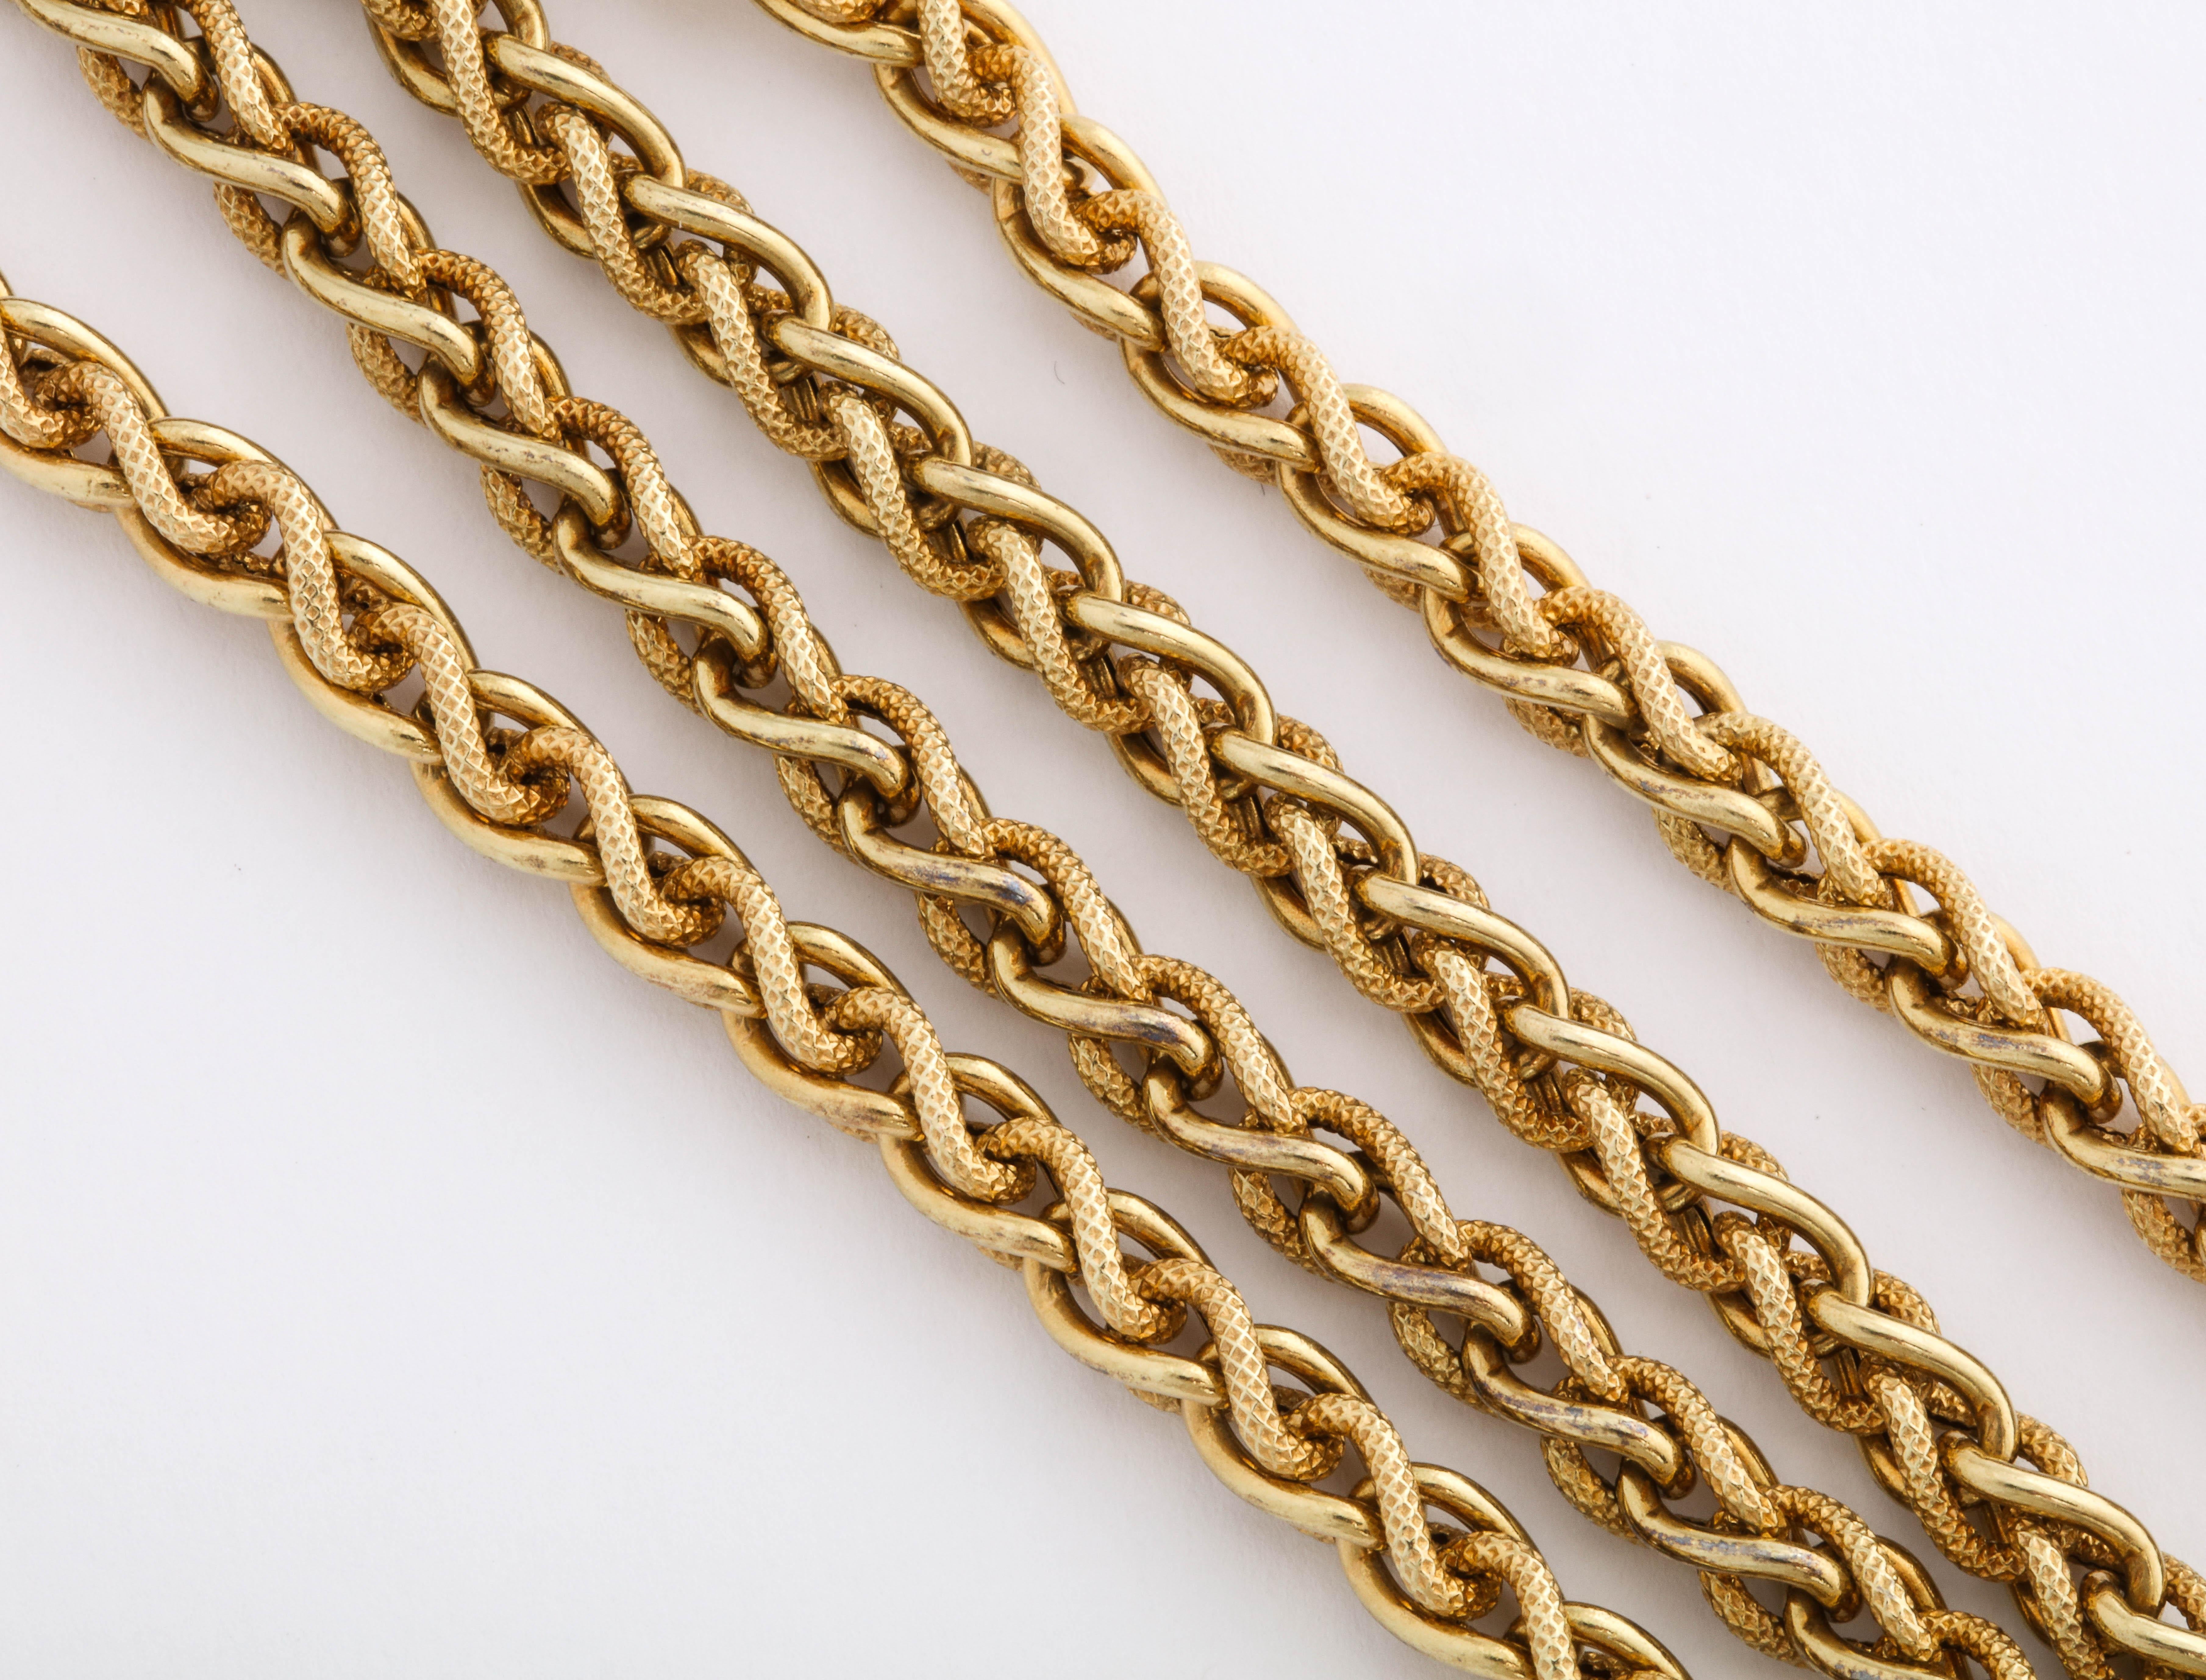 Twisted rope alternates in texture between textured and plain links in this pretty vintage chain. The twisting makes keeps the links free from scratches. The necklace is ornamental and perfect on its own, with a pendant of layered with other chains.